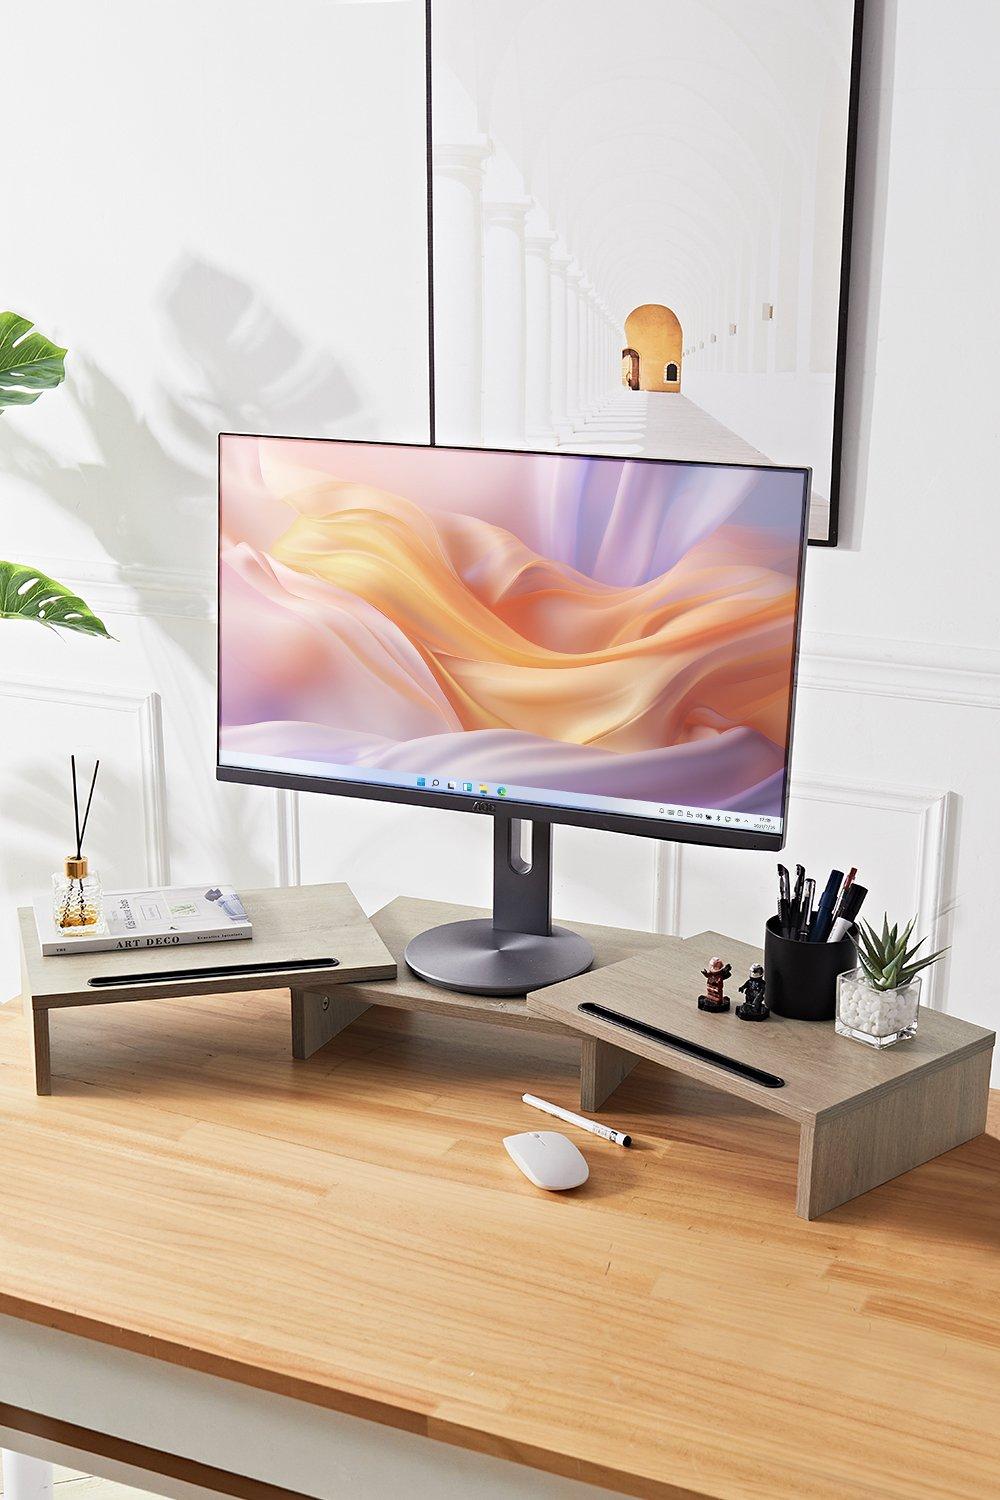 Dual Computer Monitor Stand